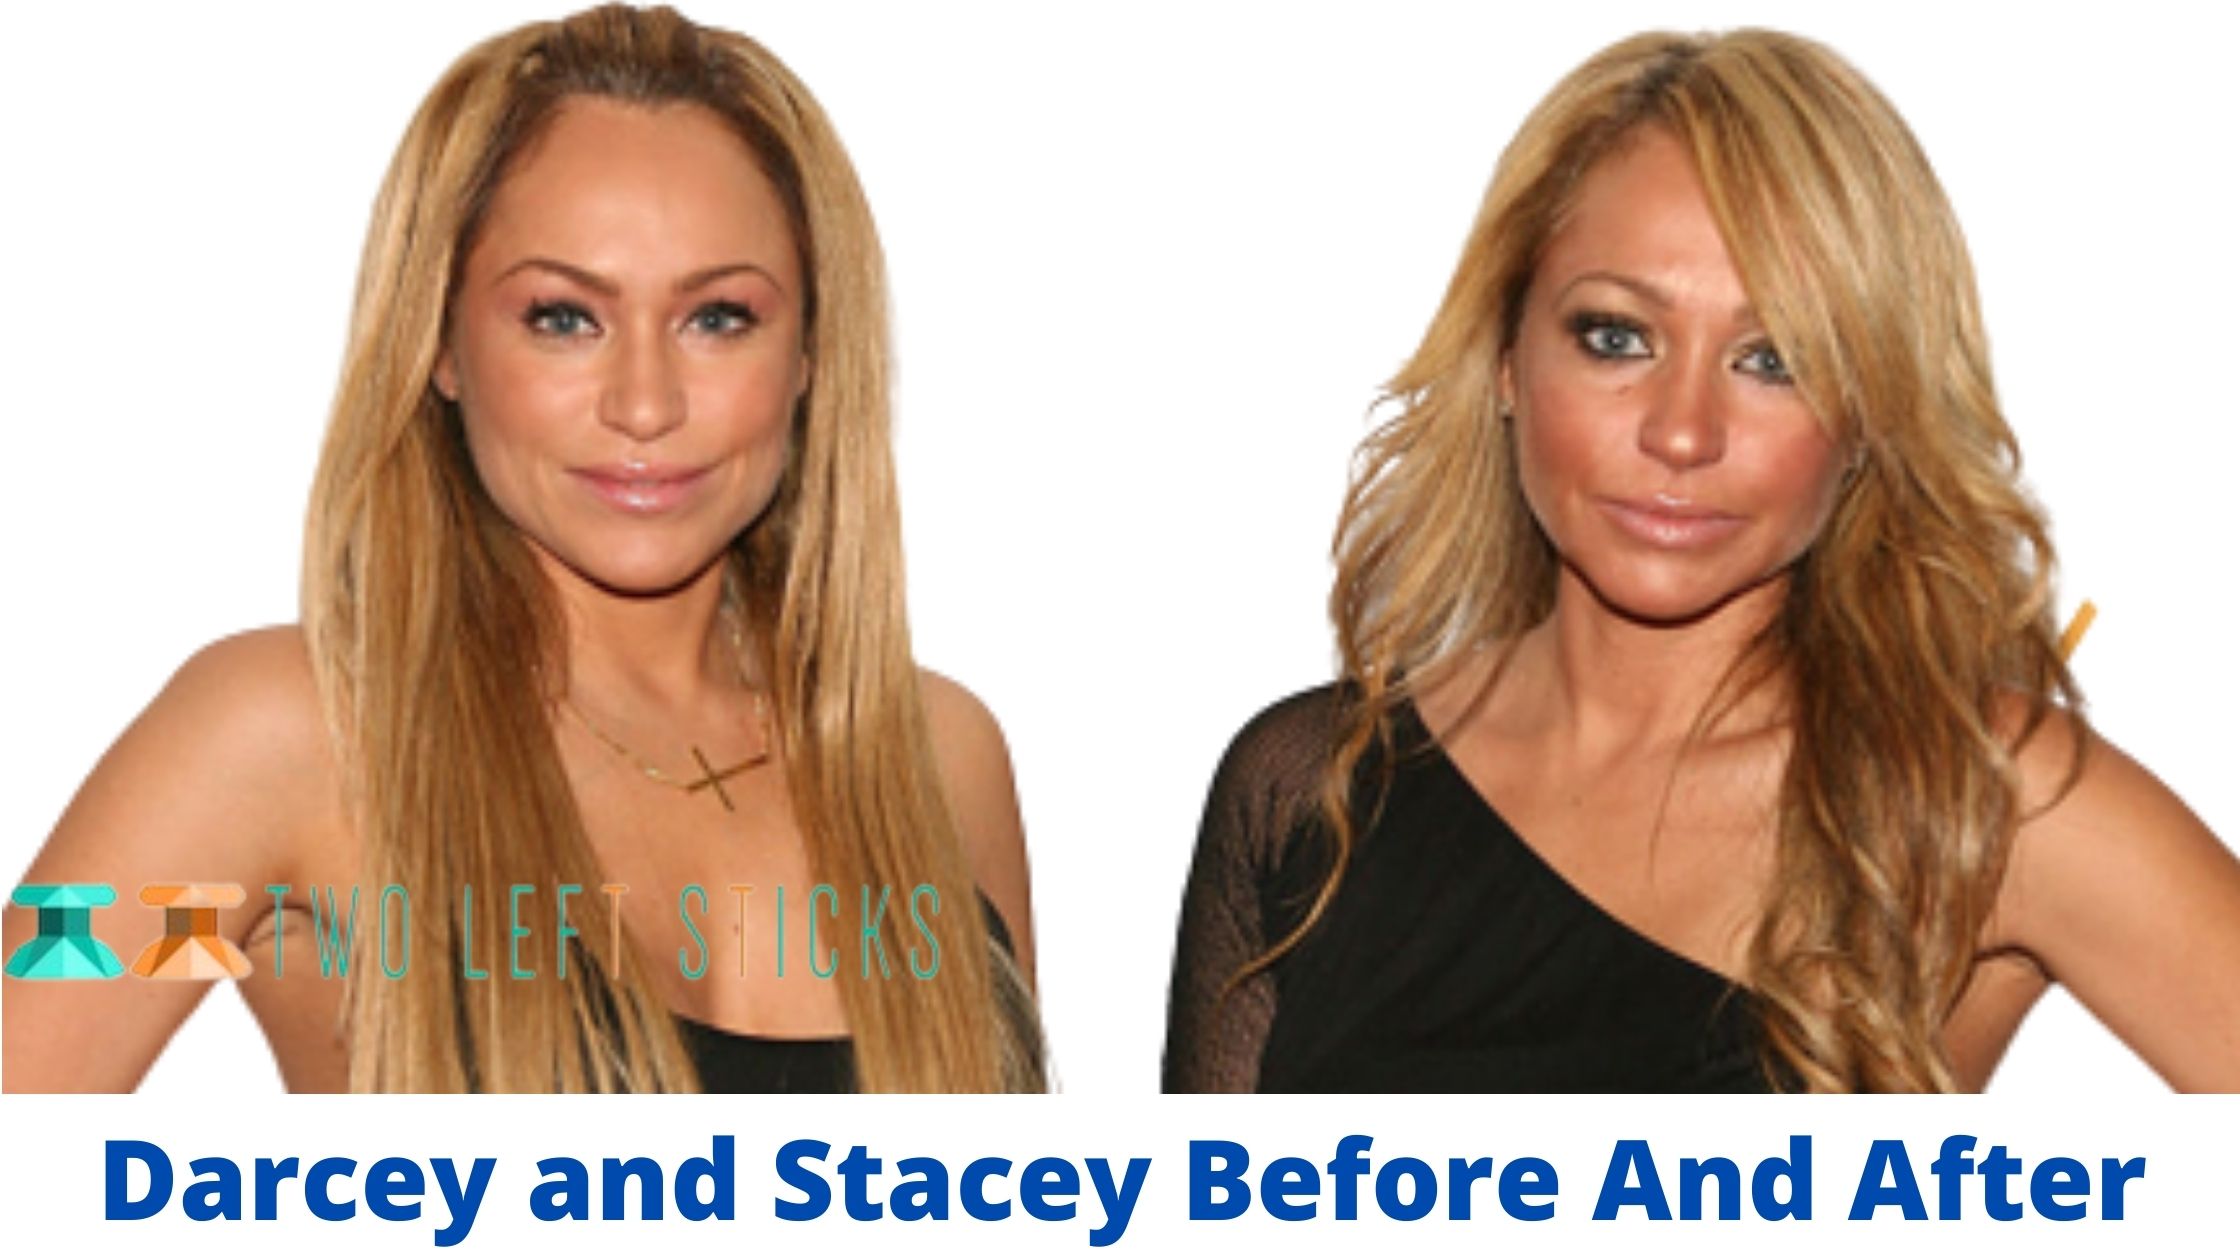 Darcey and Stacey Before And After-twoleftsticks(1)